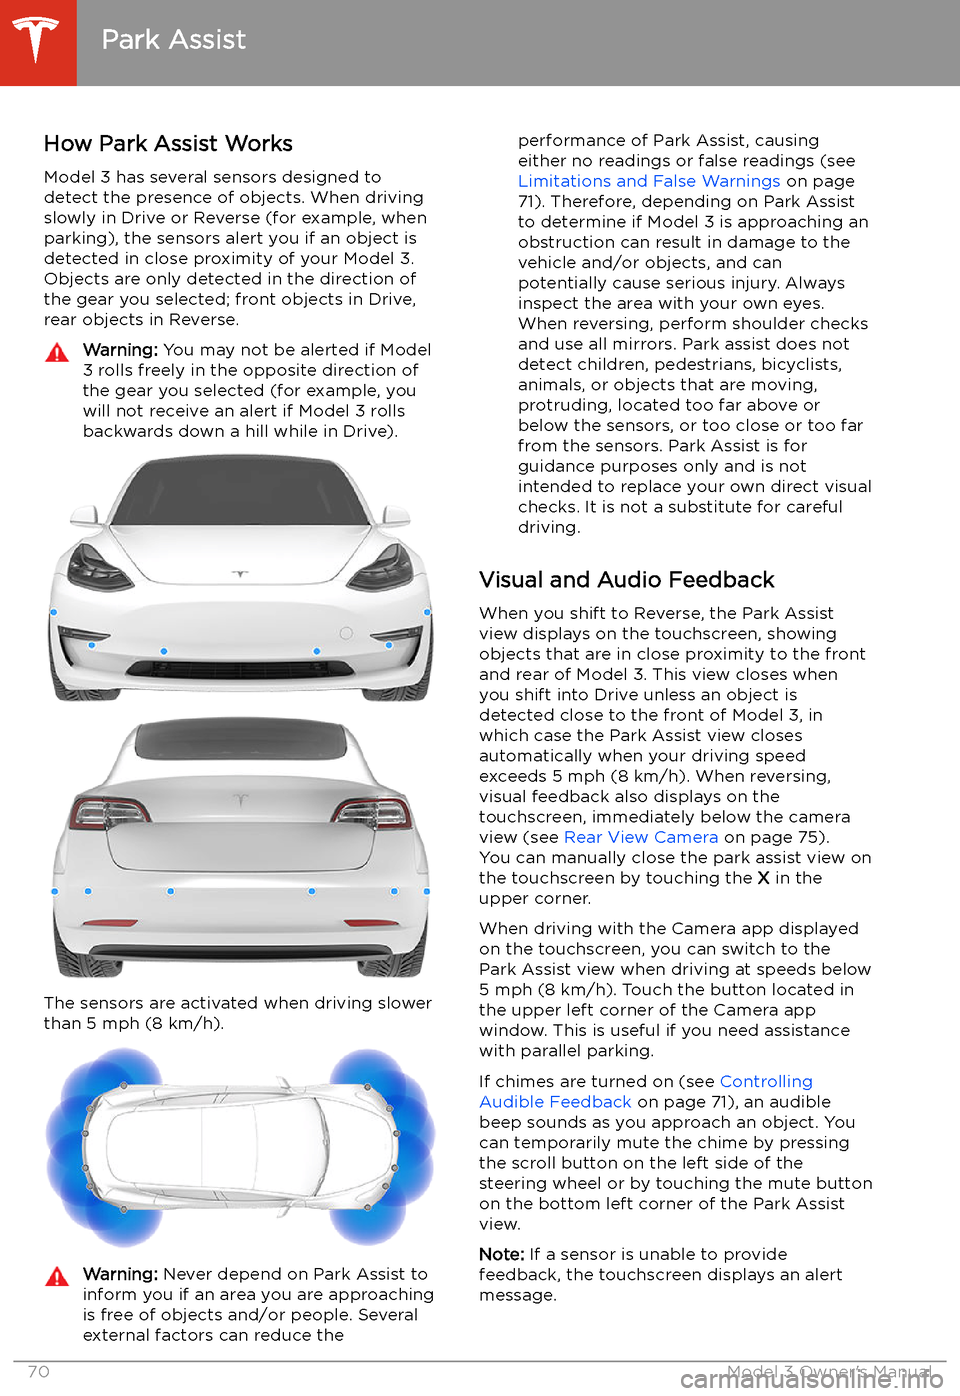 TESLA MODEL 3 2020  s User Guide Park Assist
How Park Assist Works
Model 3 has several sensors designed to
detect the presence of objects. When driving
slowly in Drive or Reverse (for example, when
parking), the sensors alert you if 